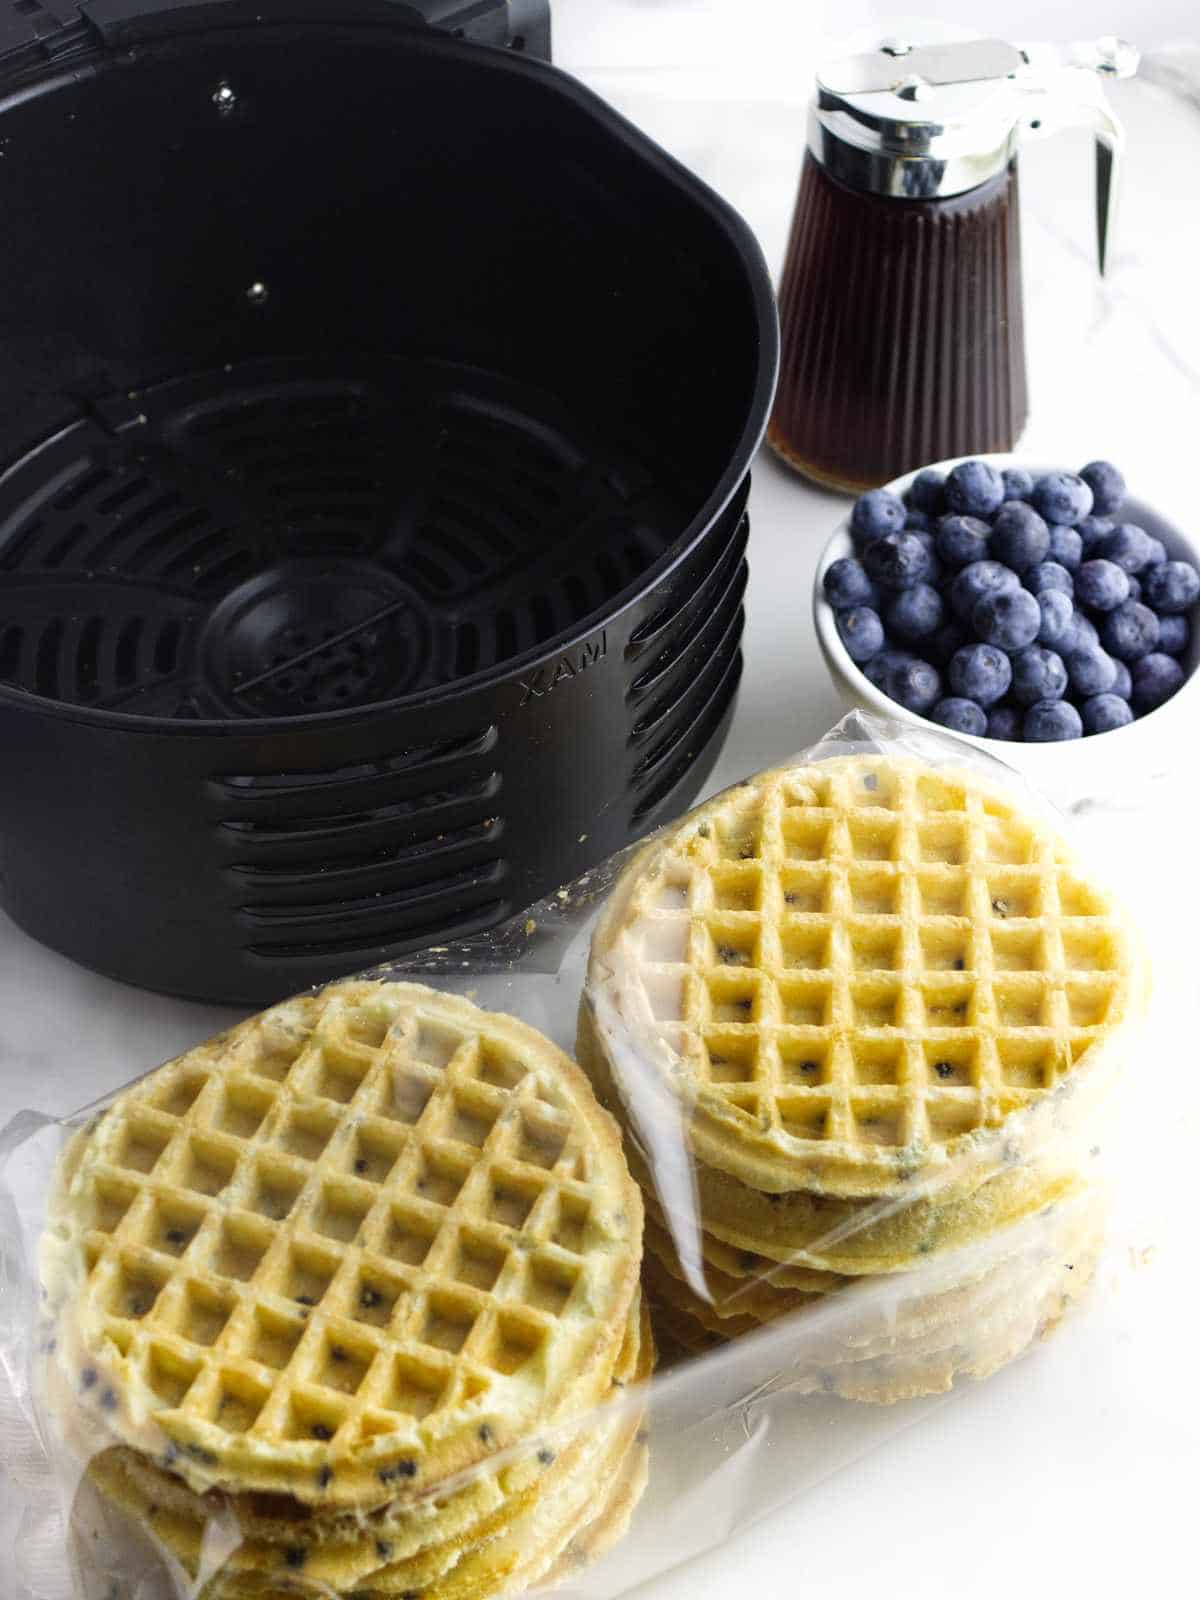 air fryer, frozen waffles, pitcher of maple syrup, and bowl of blueberries on a white background.